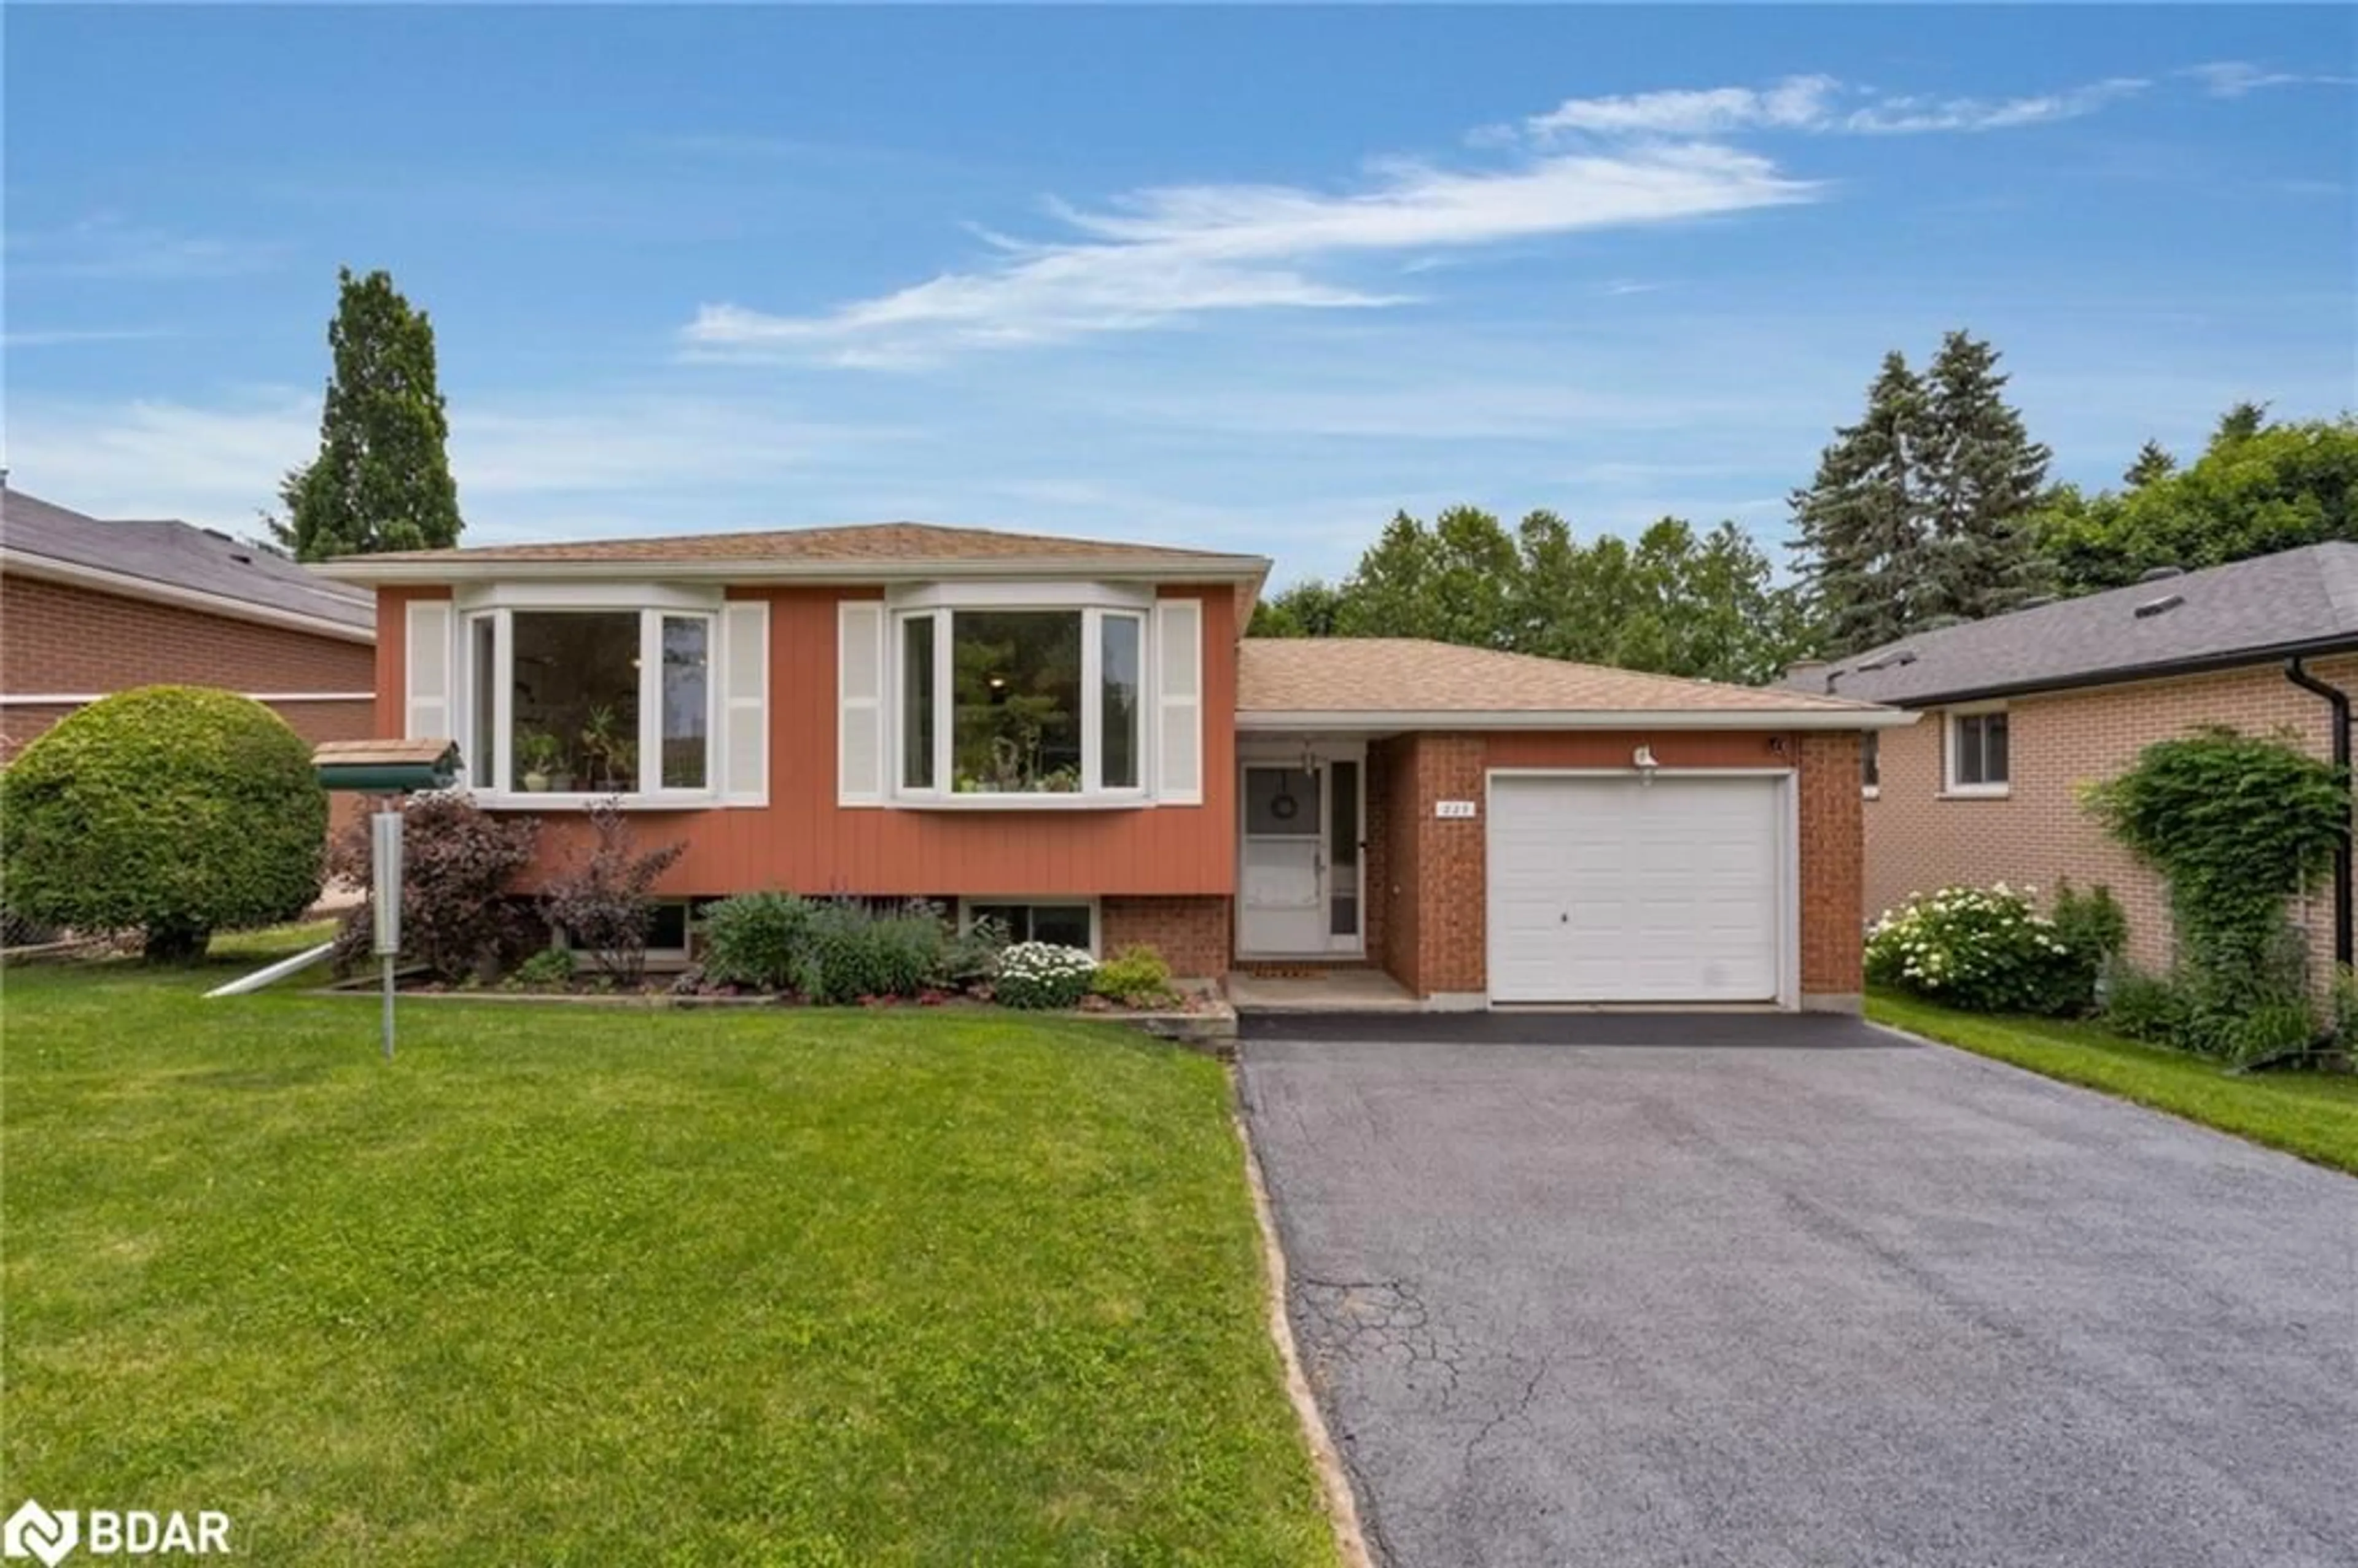 Home with brick exterior material for 227 Rose St, Barrie Ontario L4M 2V3